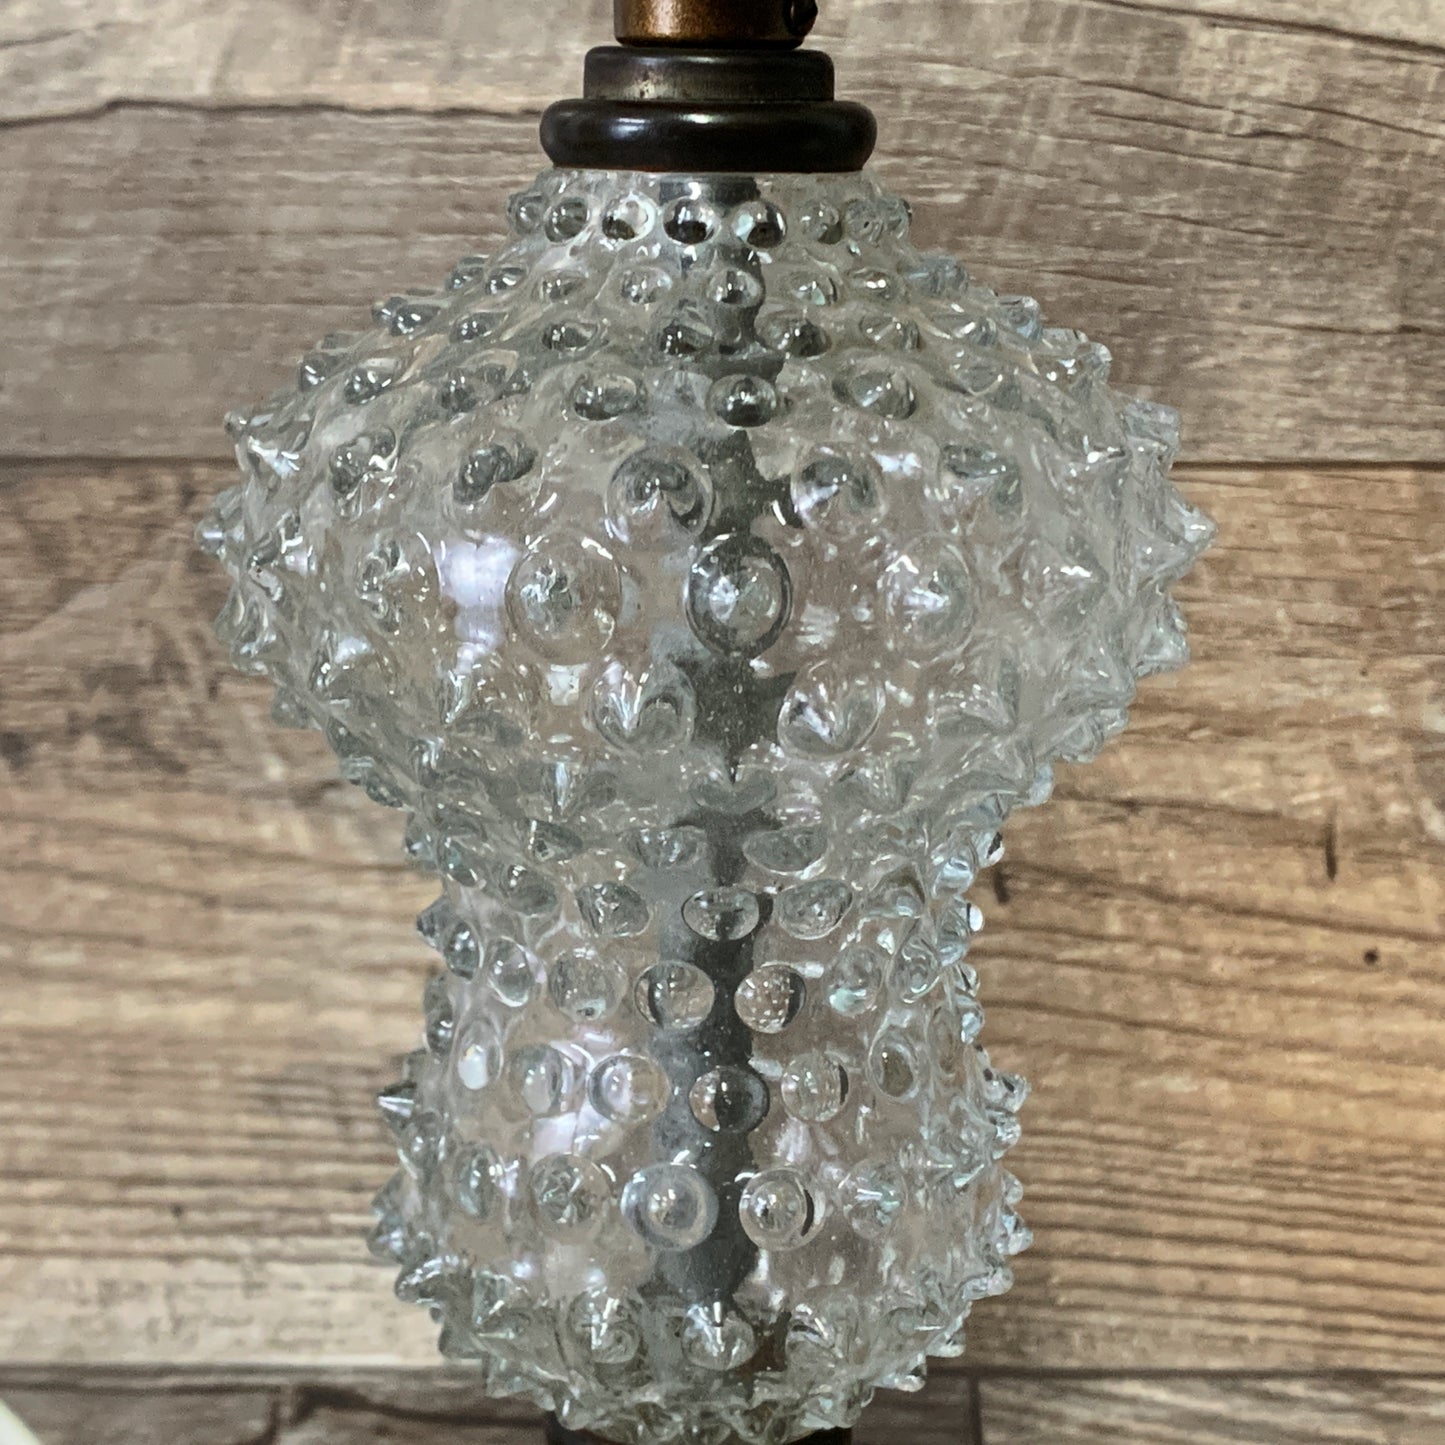 Clear Glass Lamp with Pointy Hobnail Pattern - 2 Available